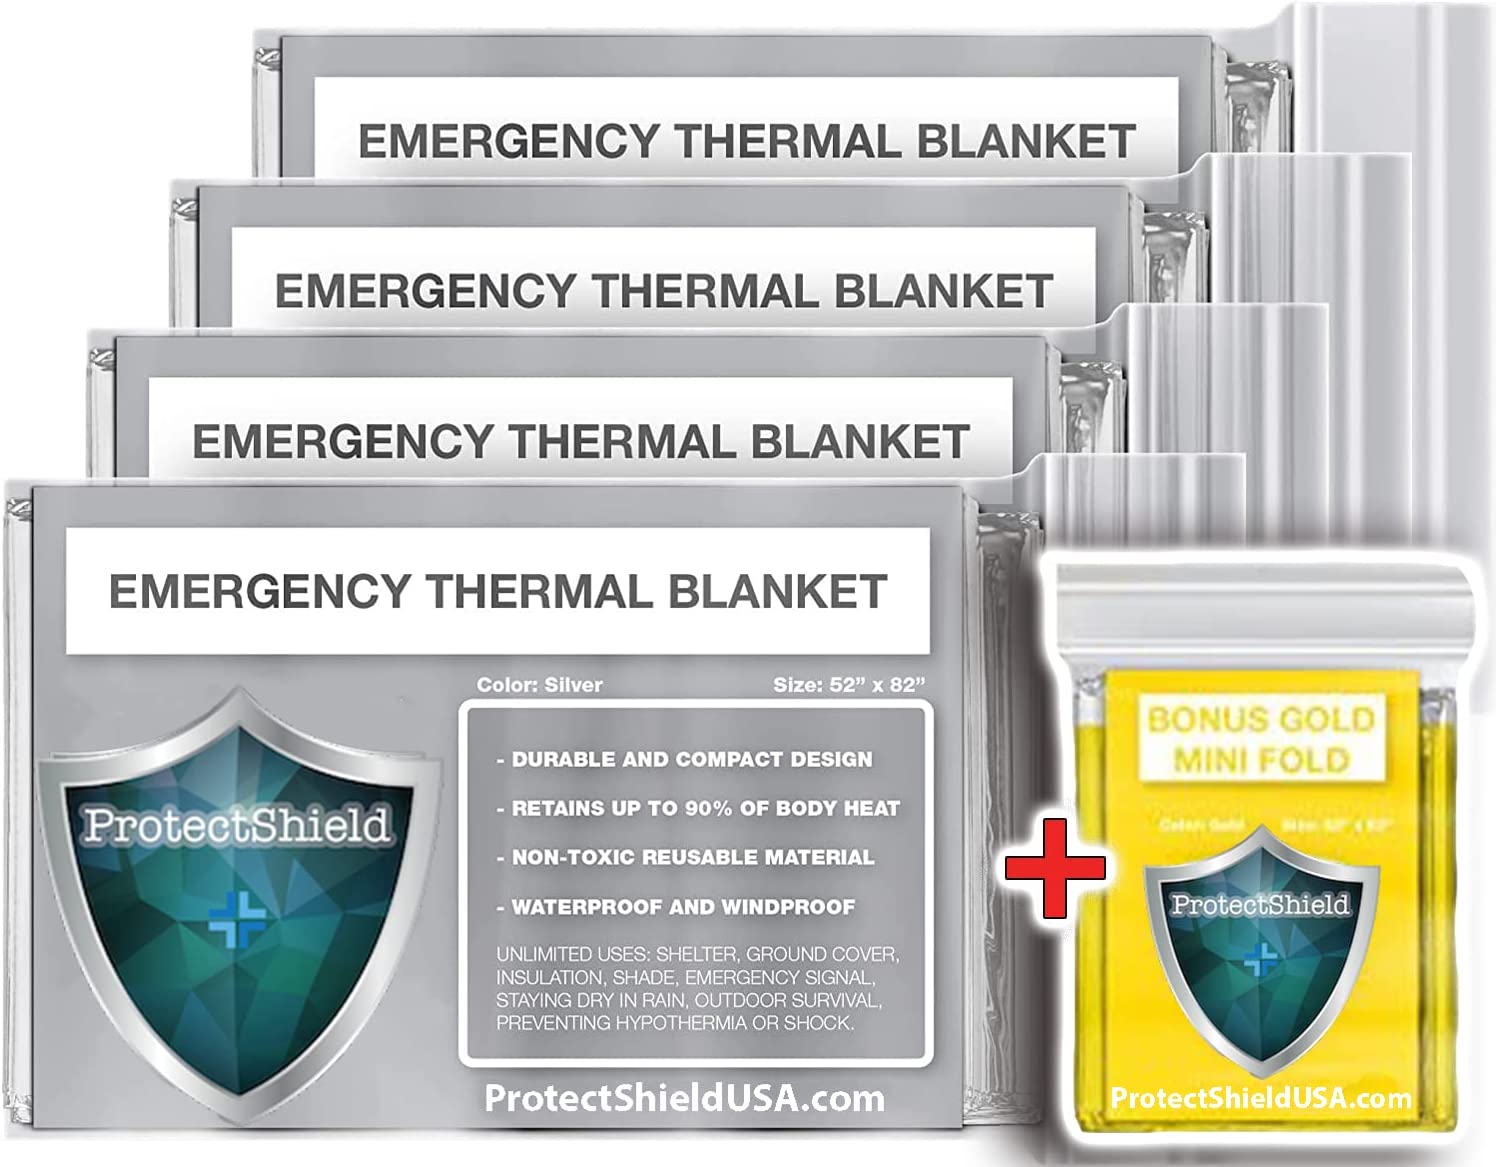 ProtectShield Emergency Mylar Thermal Blankets + Bonus Gold Foil Space Blanket. Designed for NASA, Outdoors, Survival, First Aid, Army Green, 4 Pack (Silver)